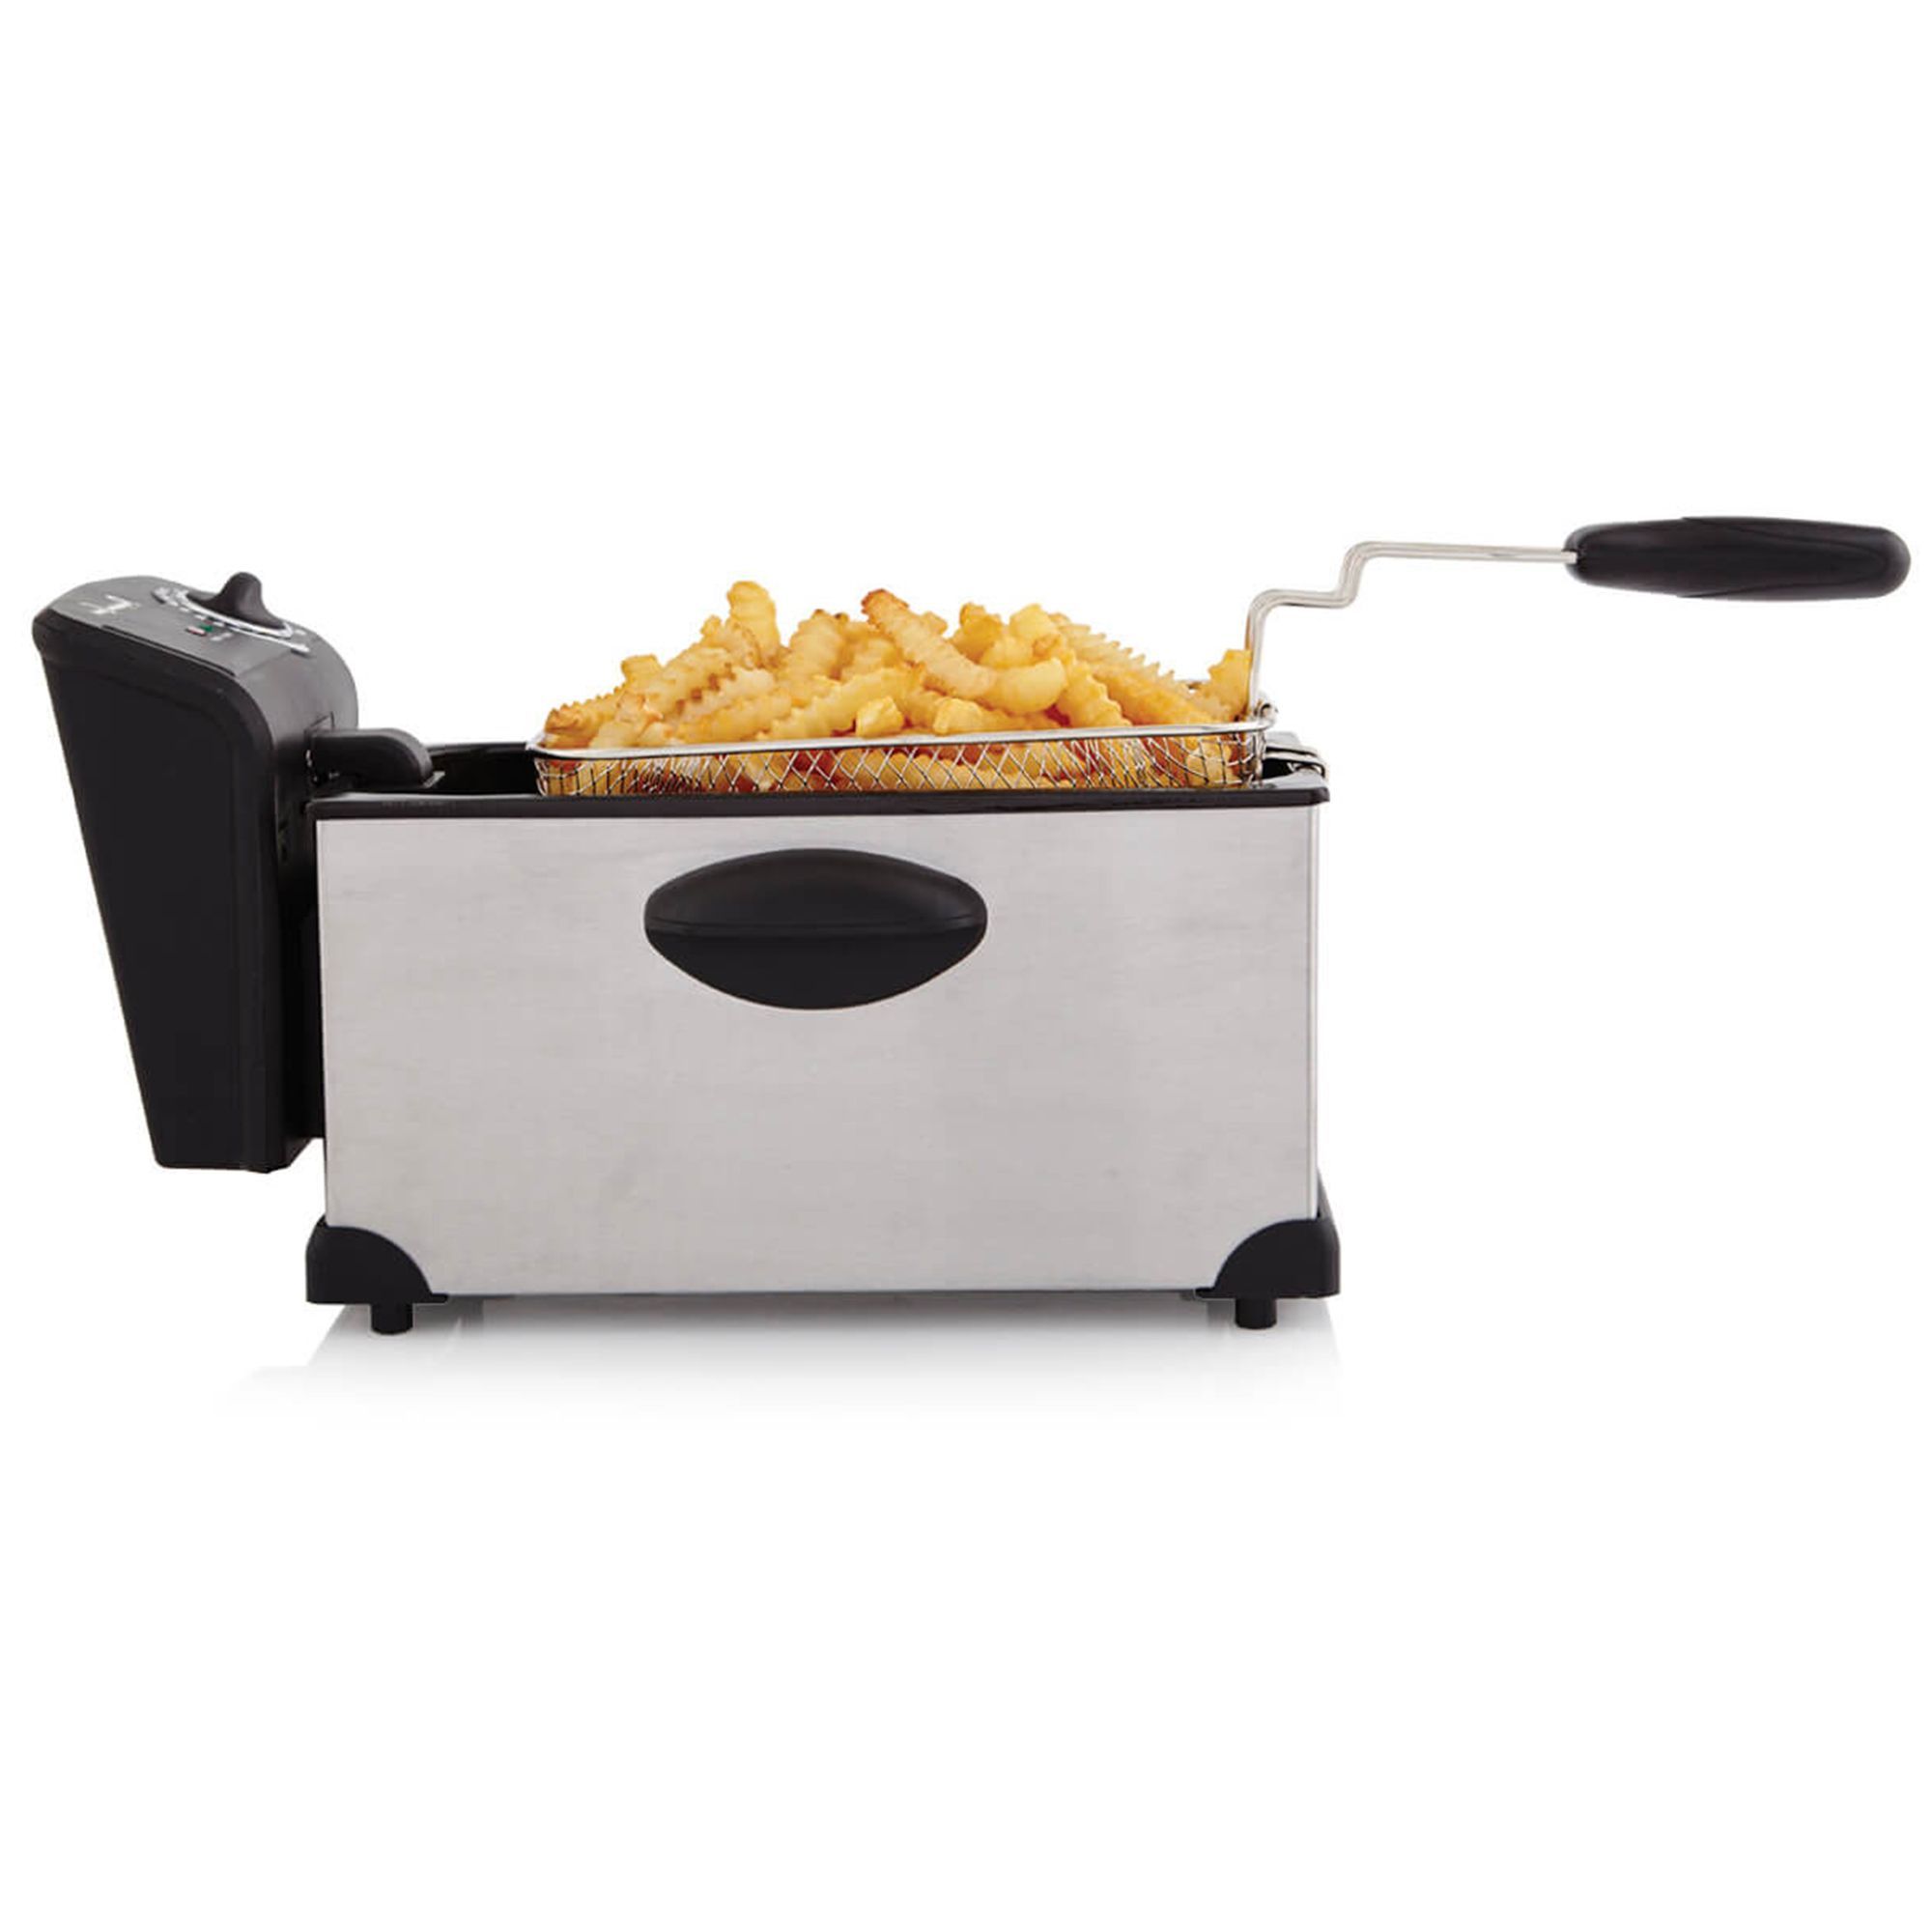 Classic Deep Fryer, 3L, Stainless Steel